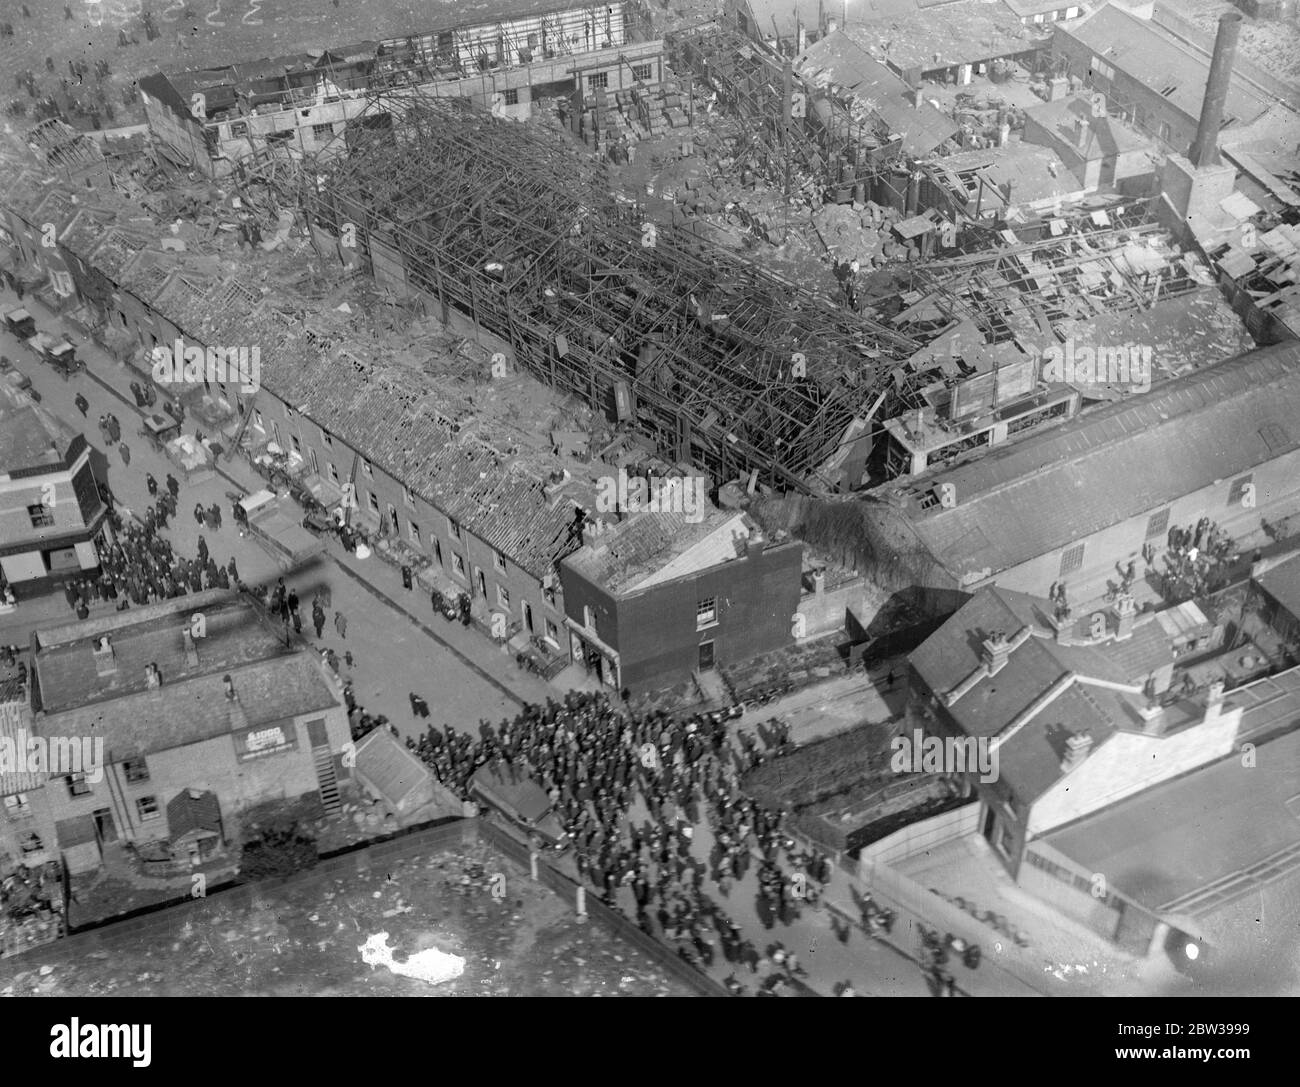 Death and devastation follows explosion at Mitcham chemical factory . A boy was killed and many were injured as the result of an explosion at the Bush Chemical Factory at Mitcham , London . The boy was Richard Addaway , aged about 10 , of Belgrave Road , Mitcham , where the houses were demolished by the explosion . 30 March 1933 30s, 30's, 1930s, 1930's, thirties, nineteen thirties Stock Photo